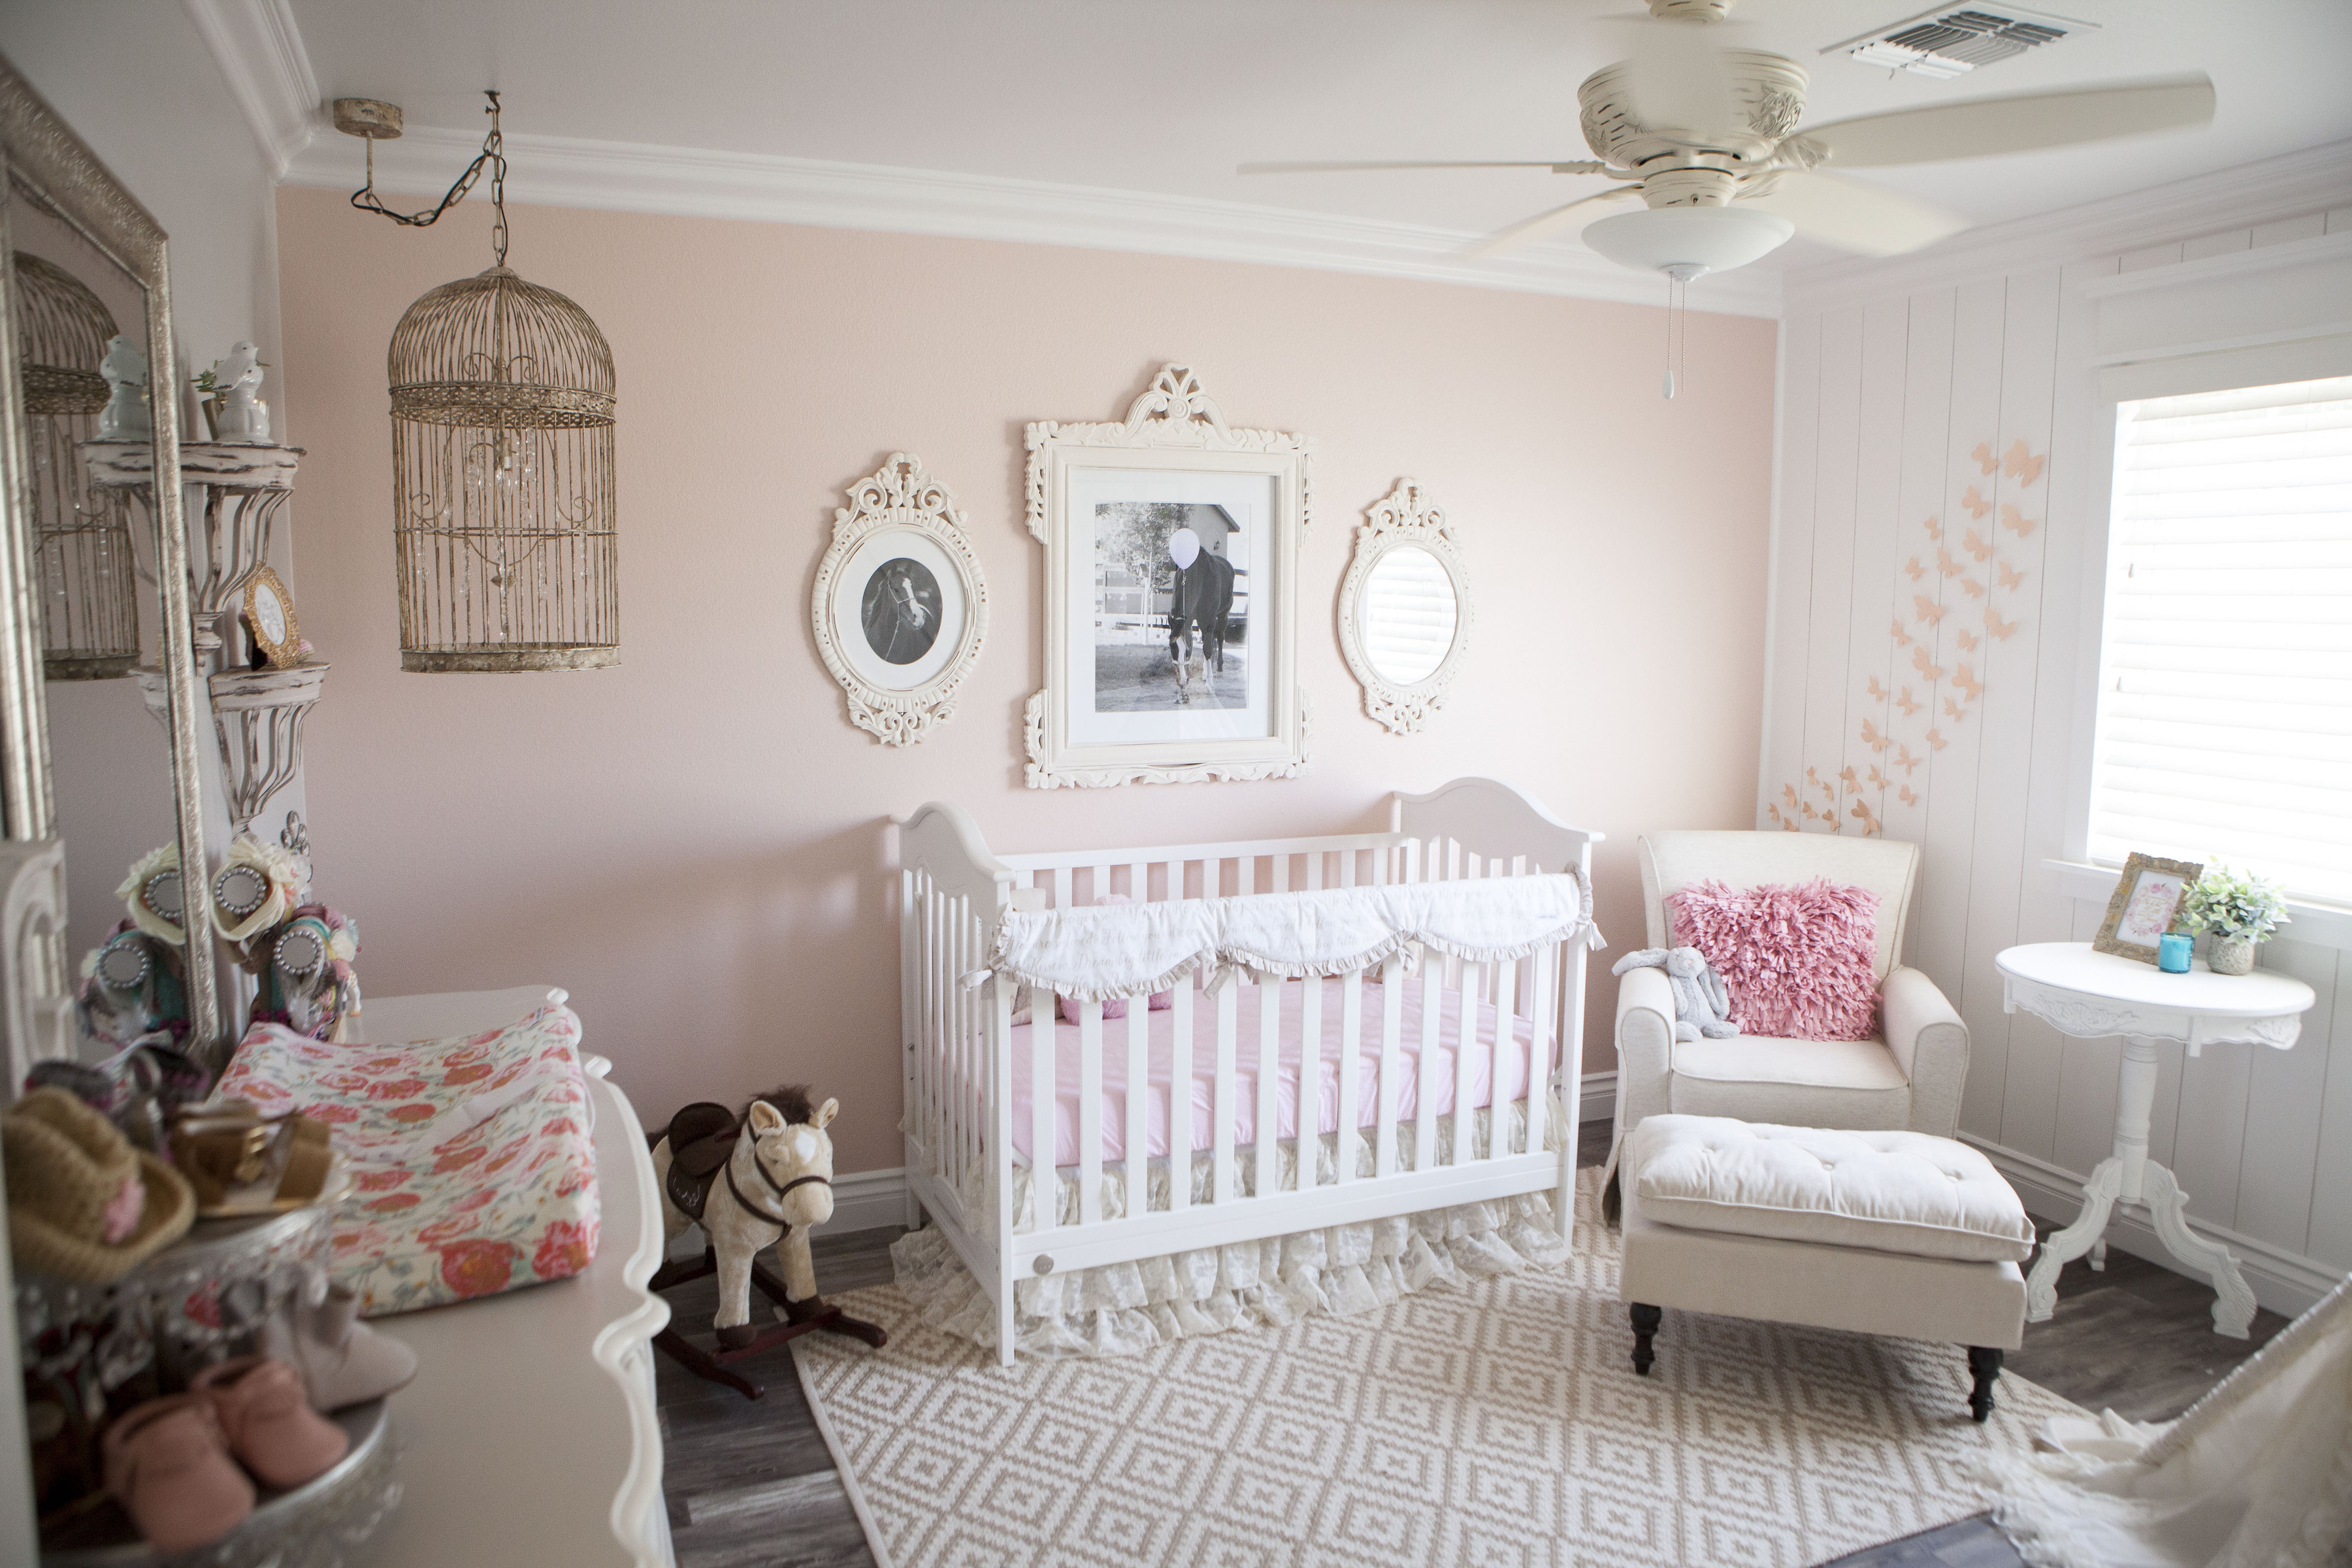 Vintage/Country Chic Inspired Nursery